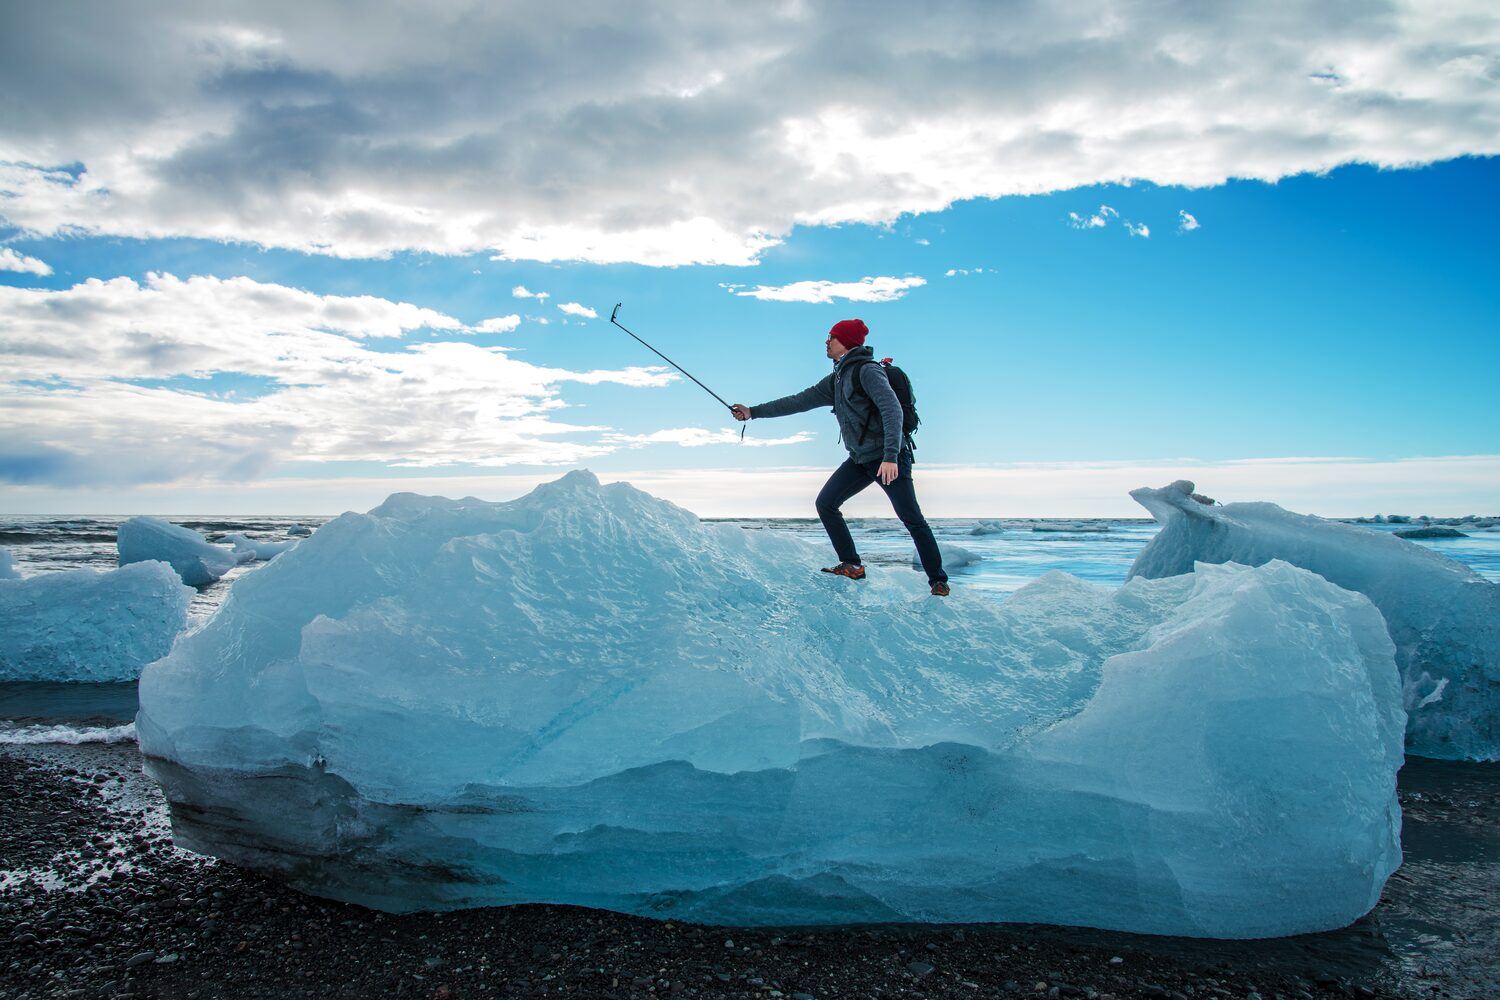 Tourist with red hat standing on iceberg, taking selfie at diamond beach, Iceland. 